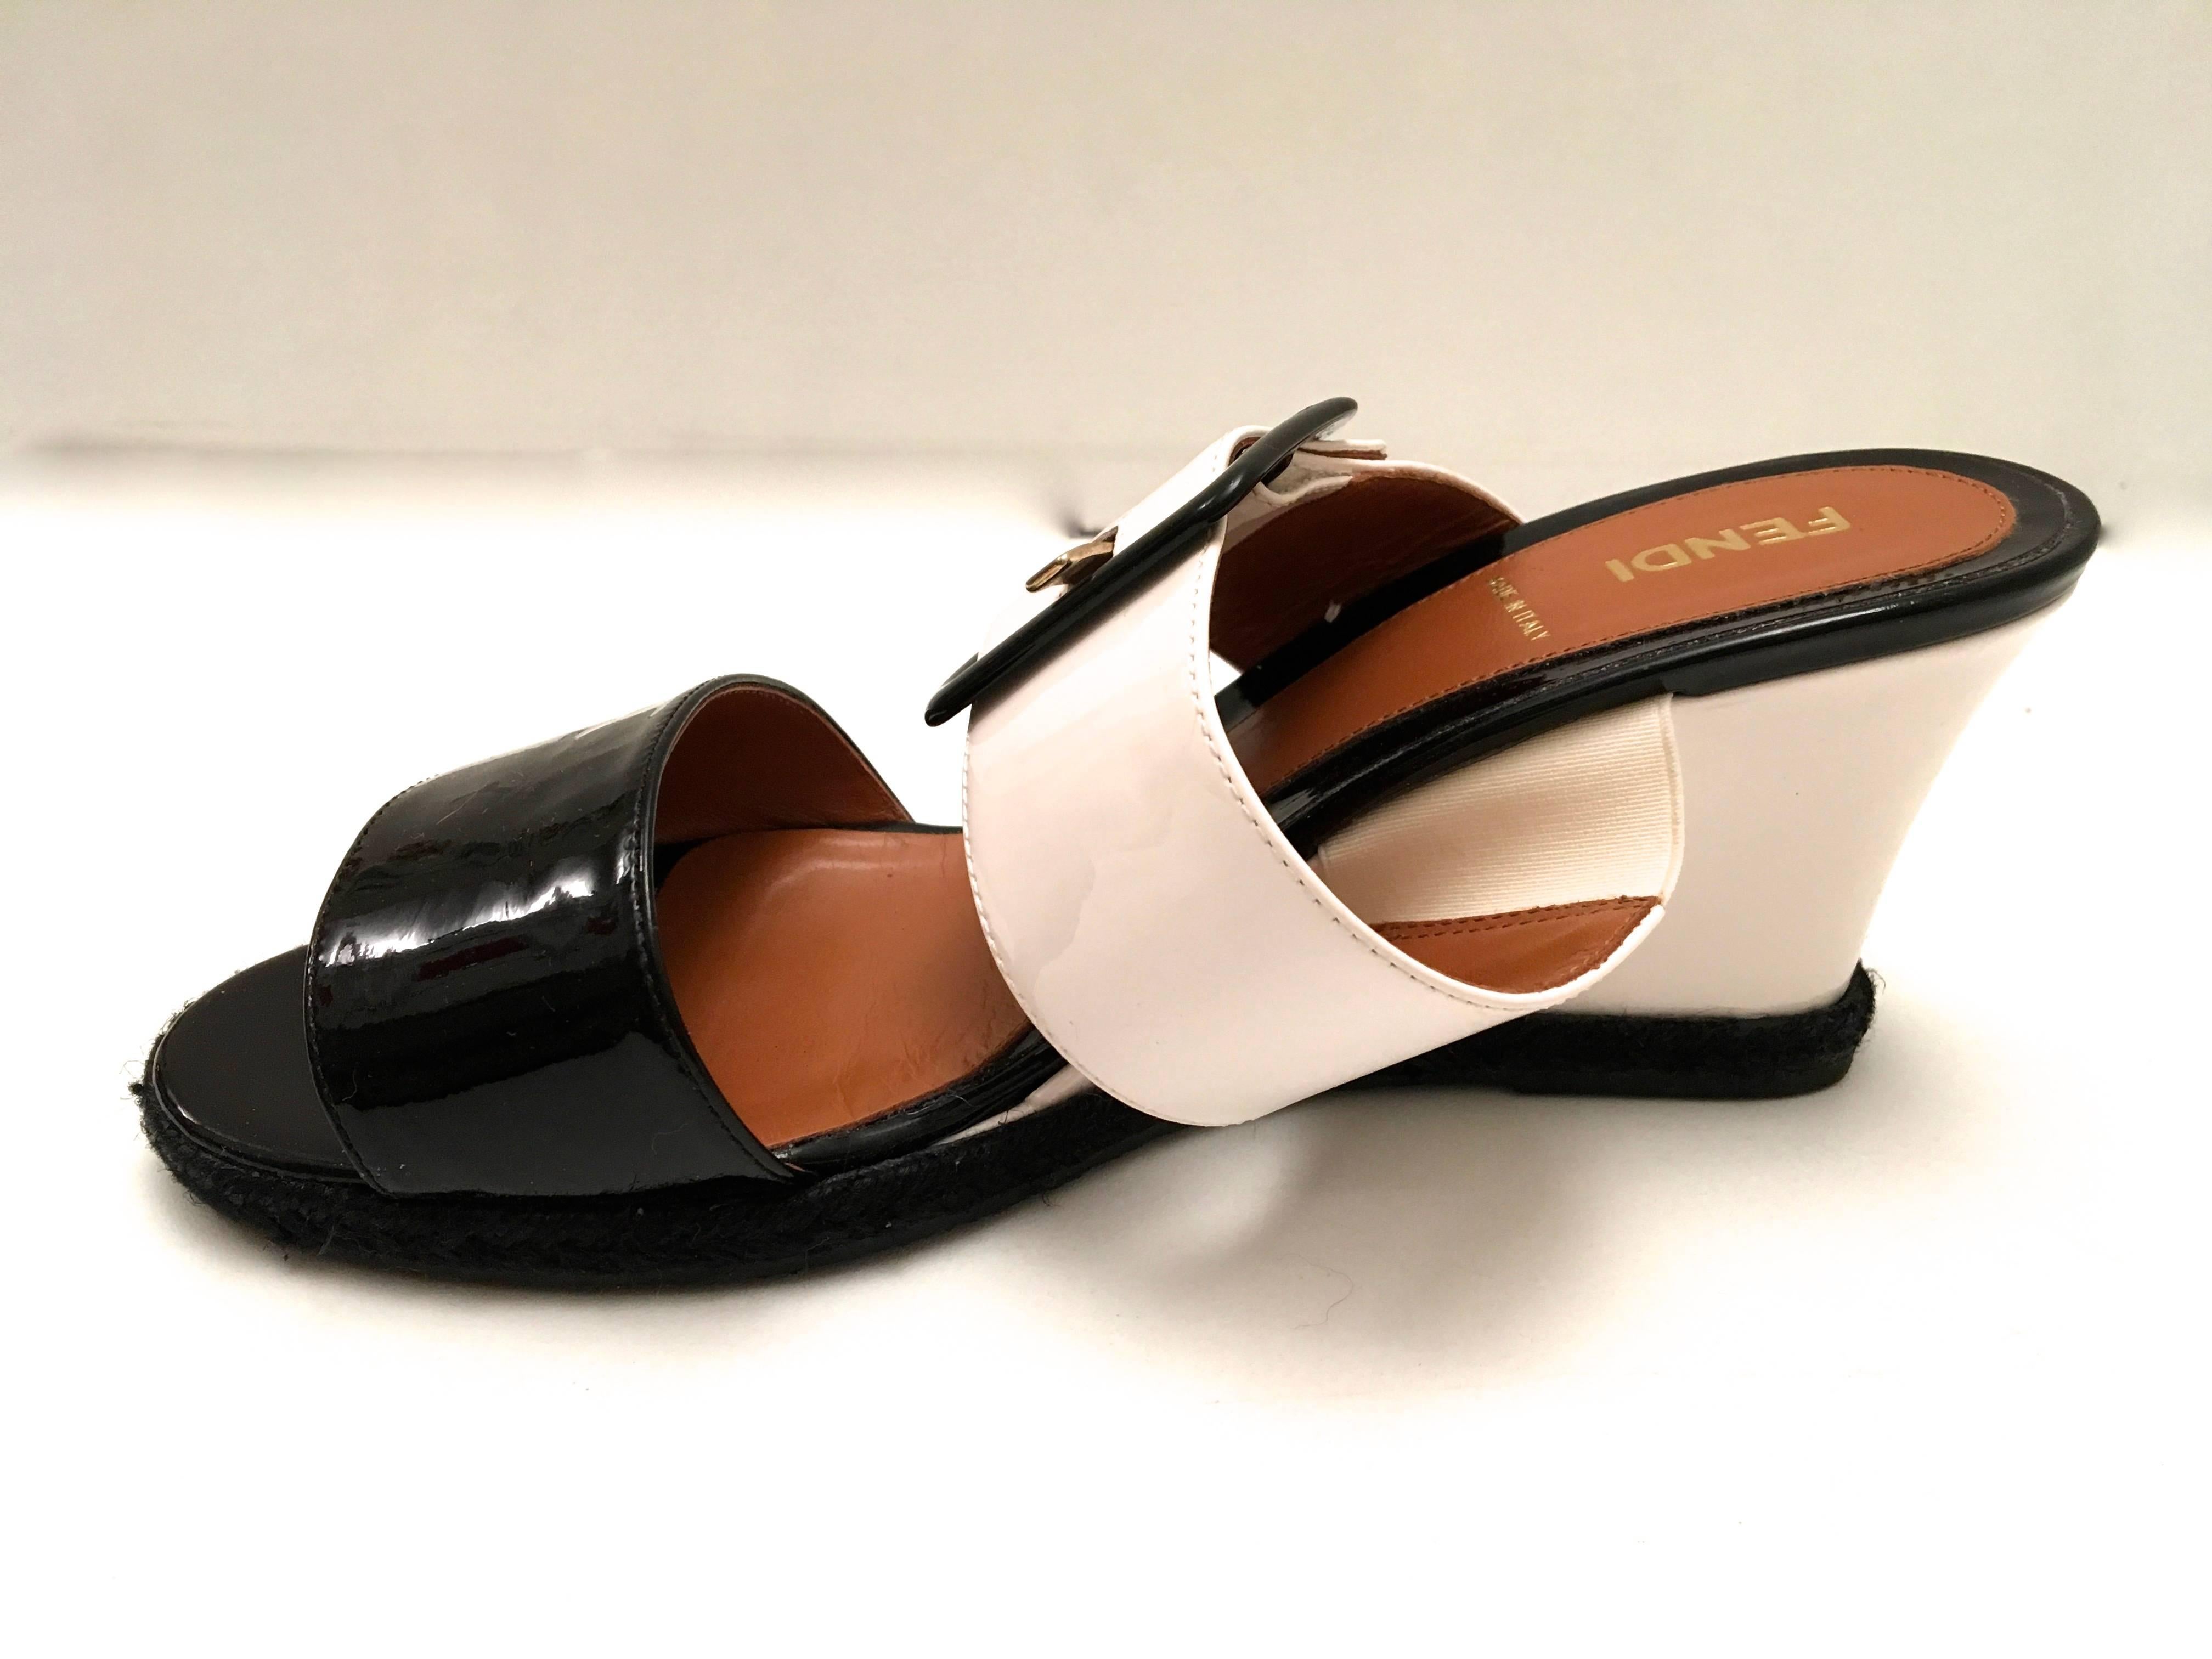 Fendi Patent Leather Wedges - Black and White - Size 37.5 For Sale 1